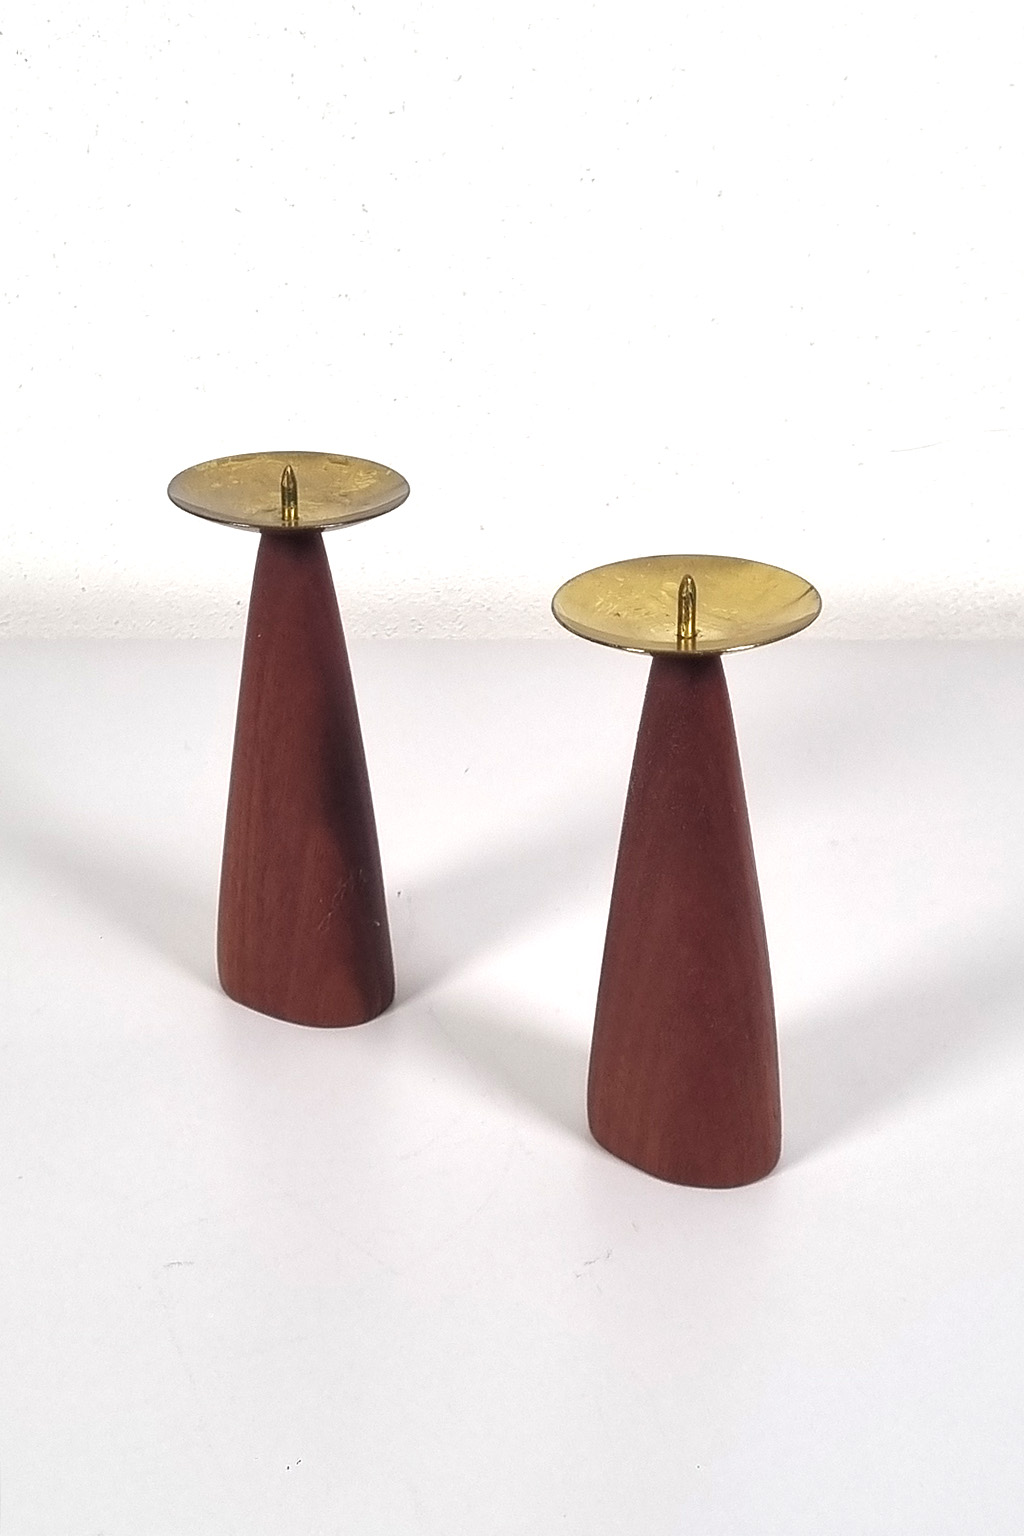 Pair of teak and brass candle holders